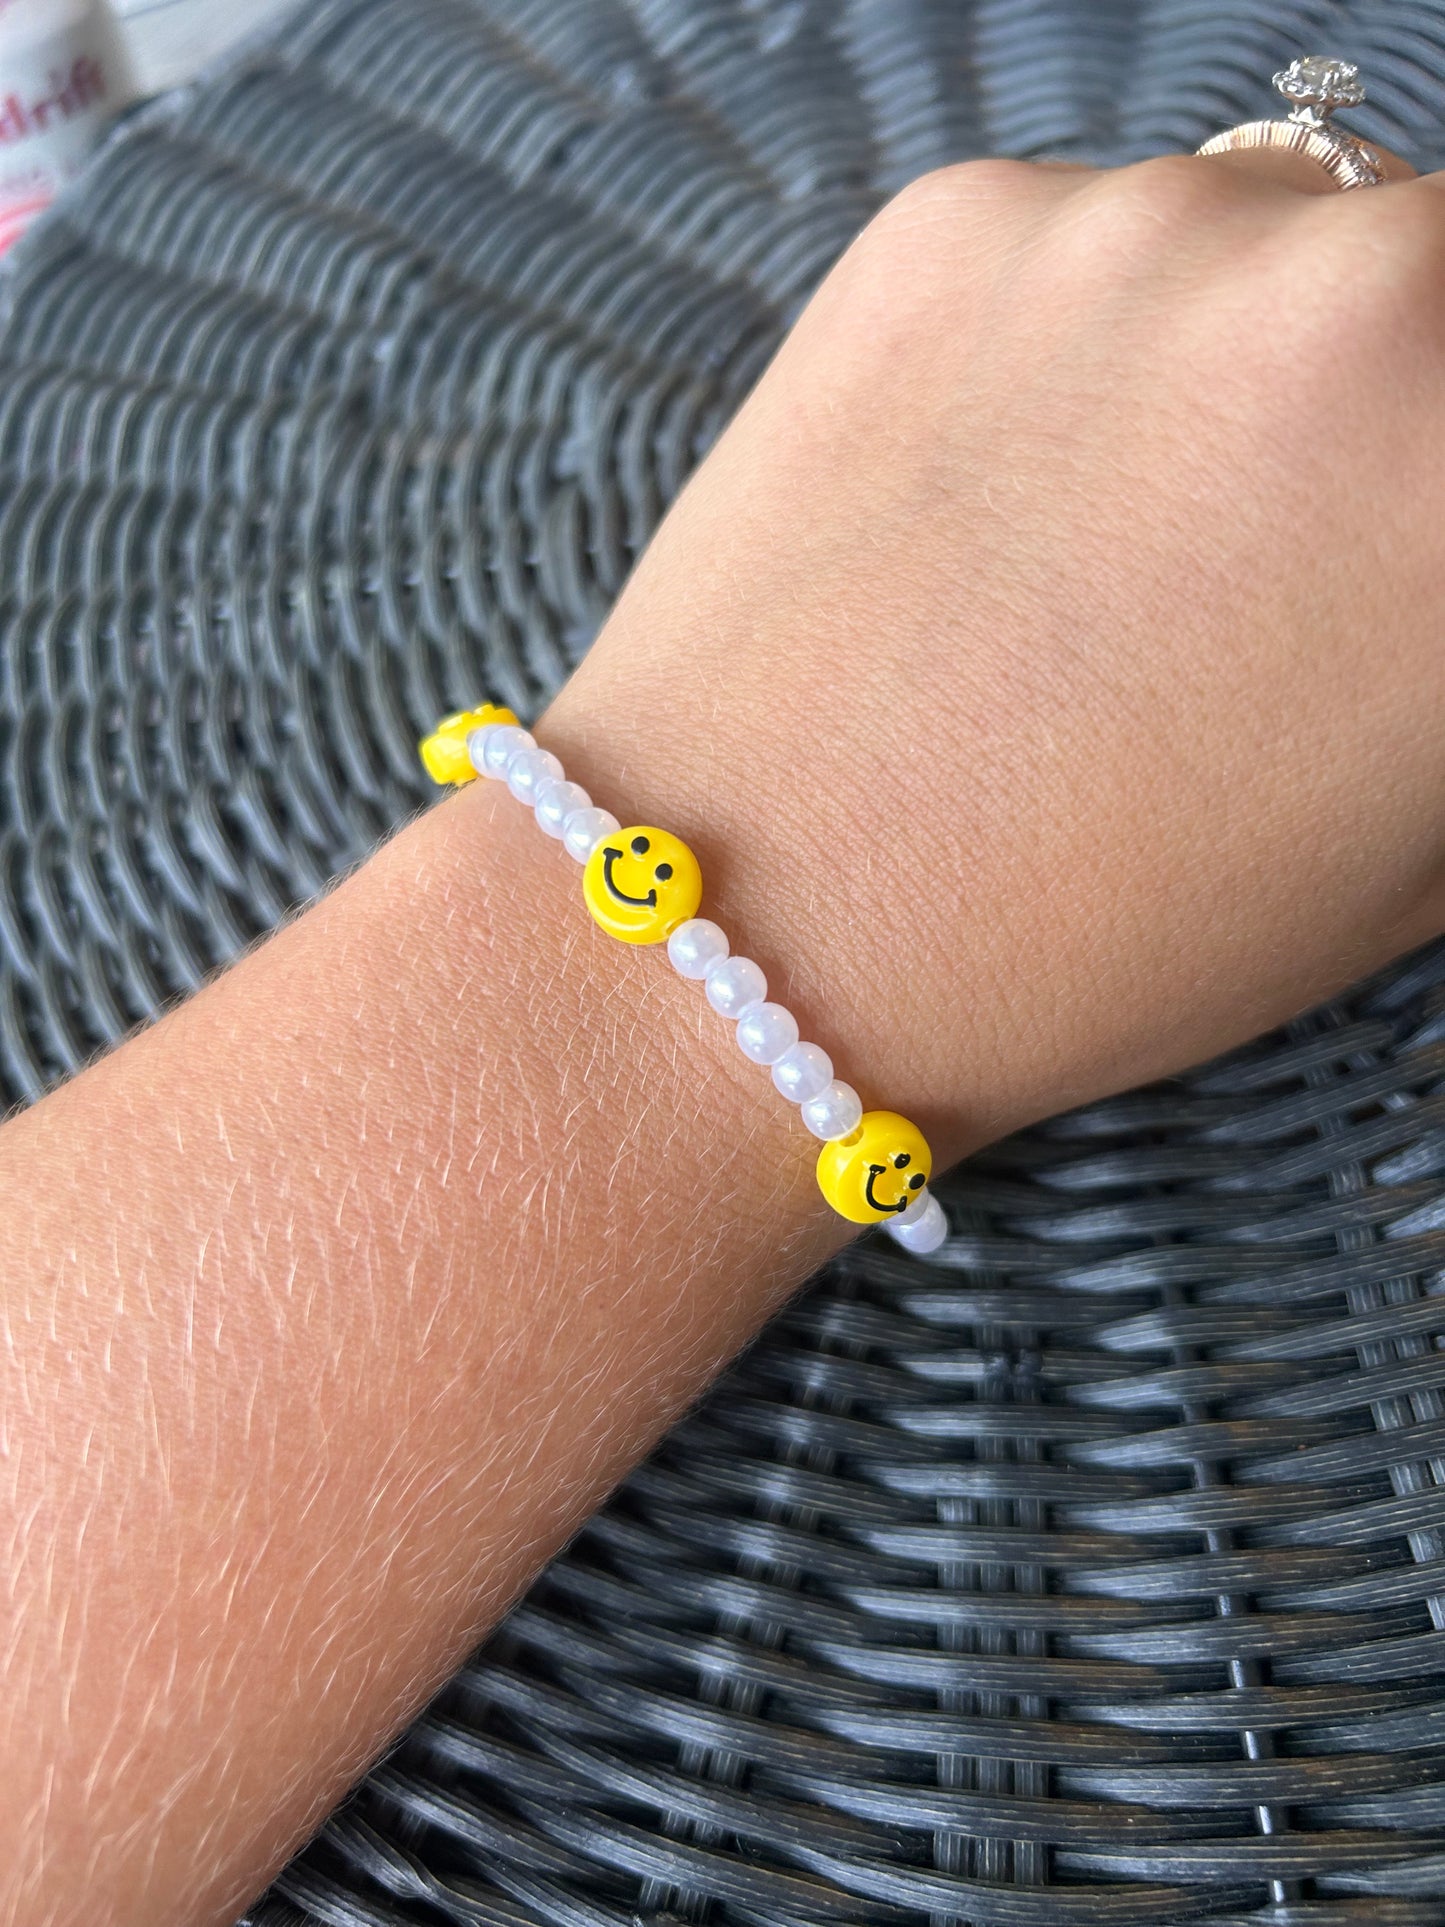 Pearl Bracelet with Smiley Faces